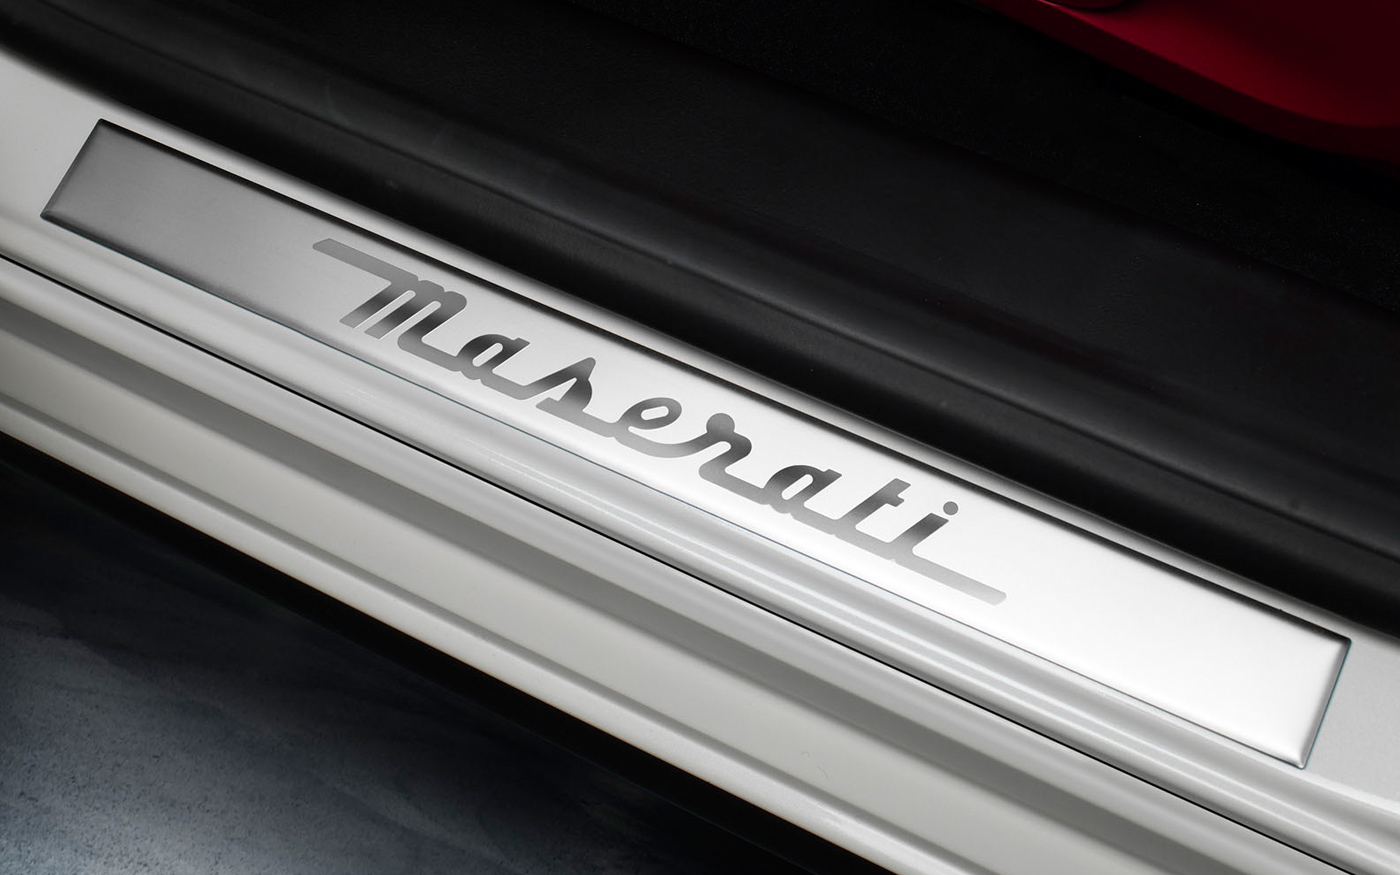 Stainless Steel Door Sill Plates with Maserati Script